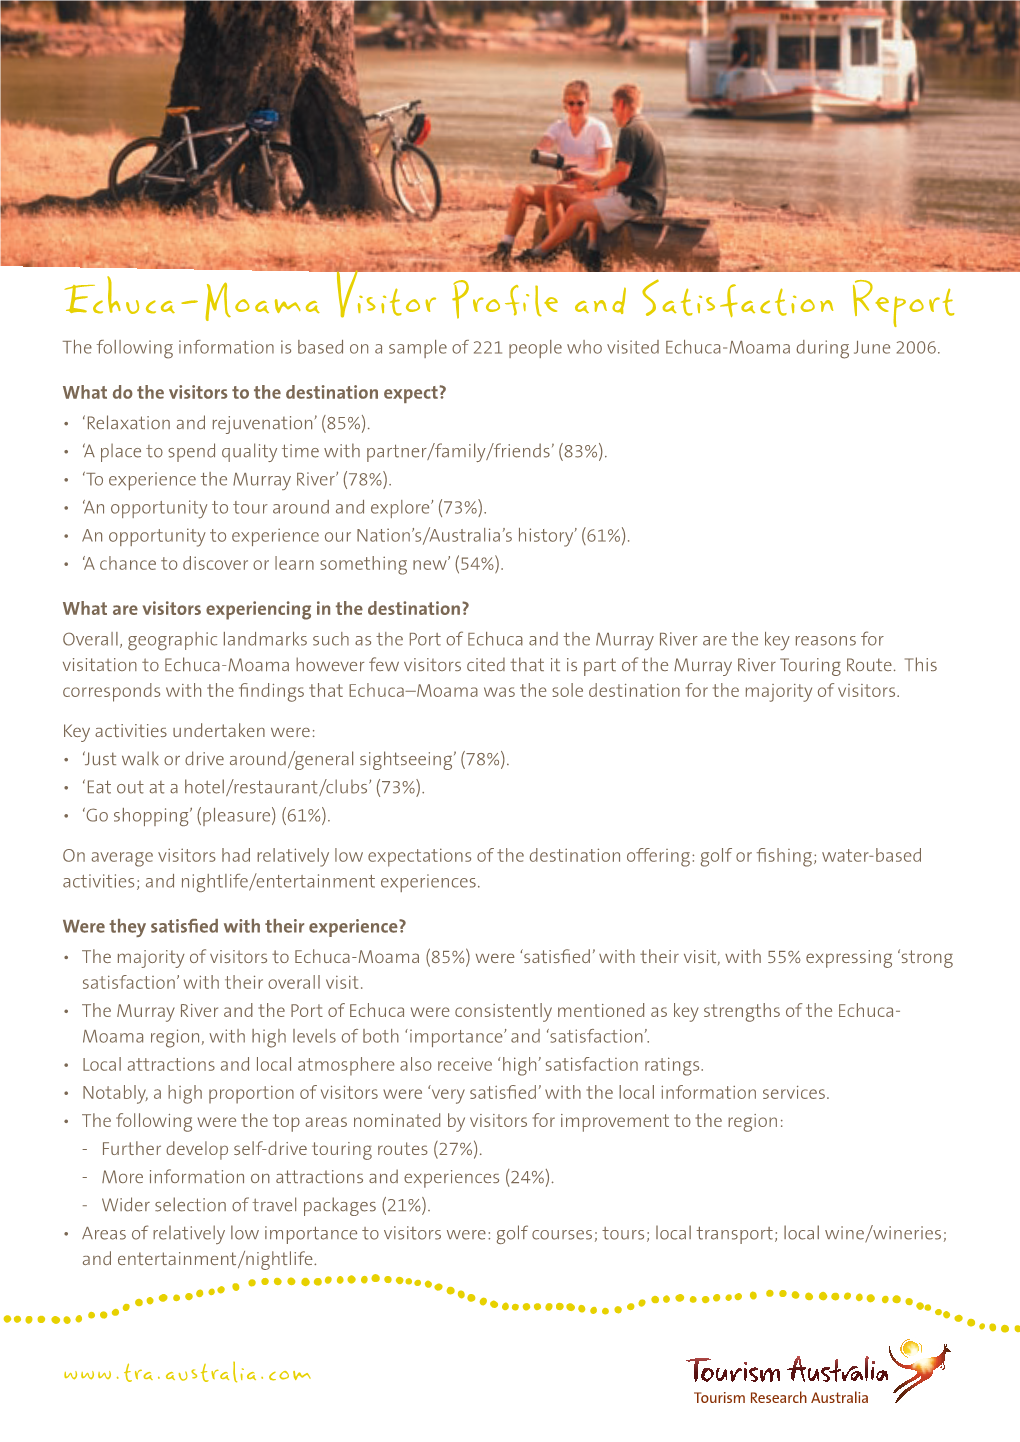 Echuca-Moama Visitor Proﬁle and Satisfaction Report the Following Information Is Based on a Sample of 221 People Who Visited Echuca-Moama During June 2006